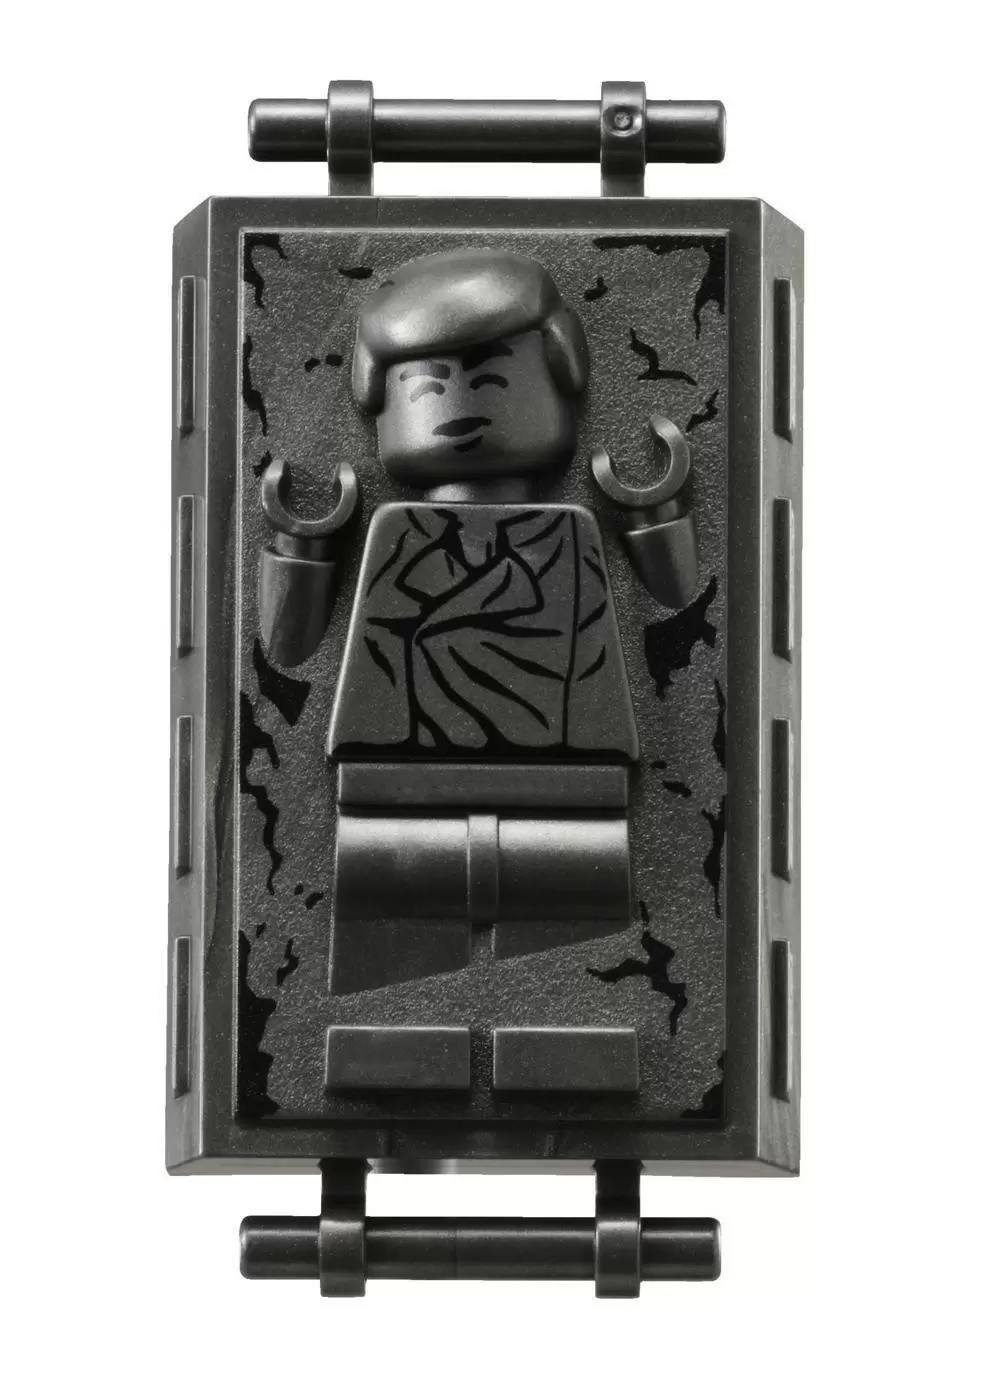 LEGO Star Wars Minifigs - Han Solo in Carbonite - Block with handles